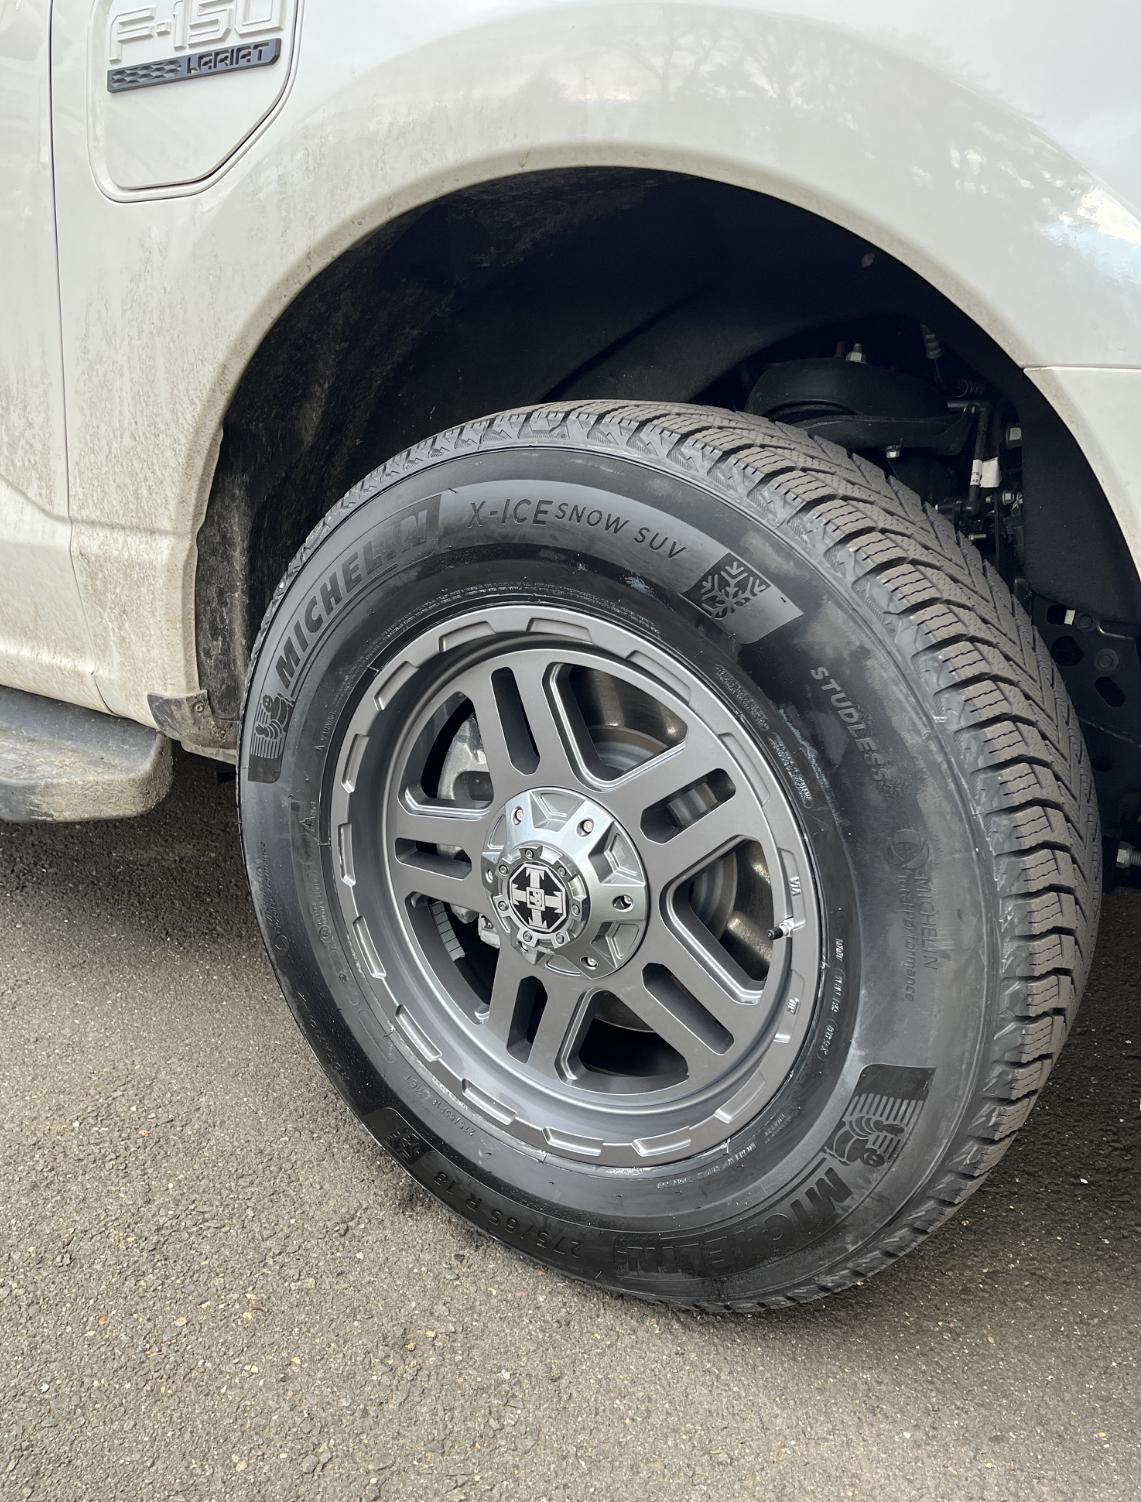 Ford F-150 Lightning Almost time for new tires, what are you planning on getting after the stock tires wear out? 3FED40FB-E04C-488E-BF21-A692FD65884C